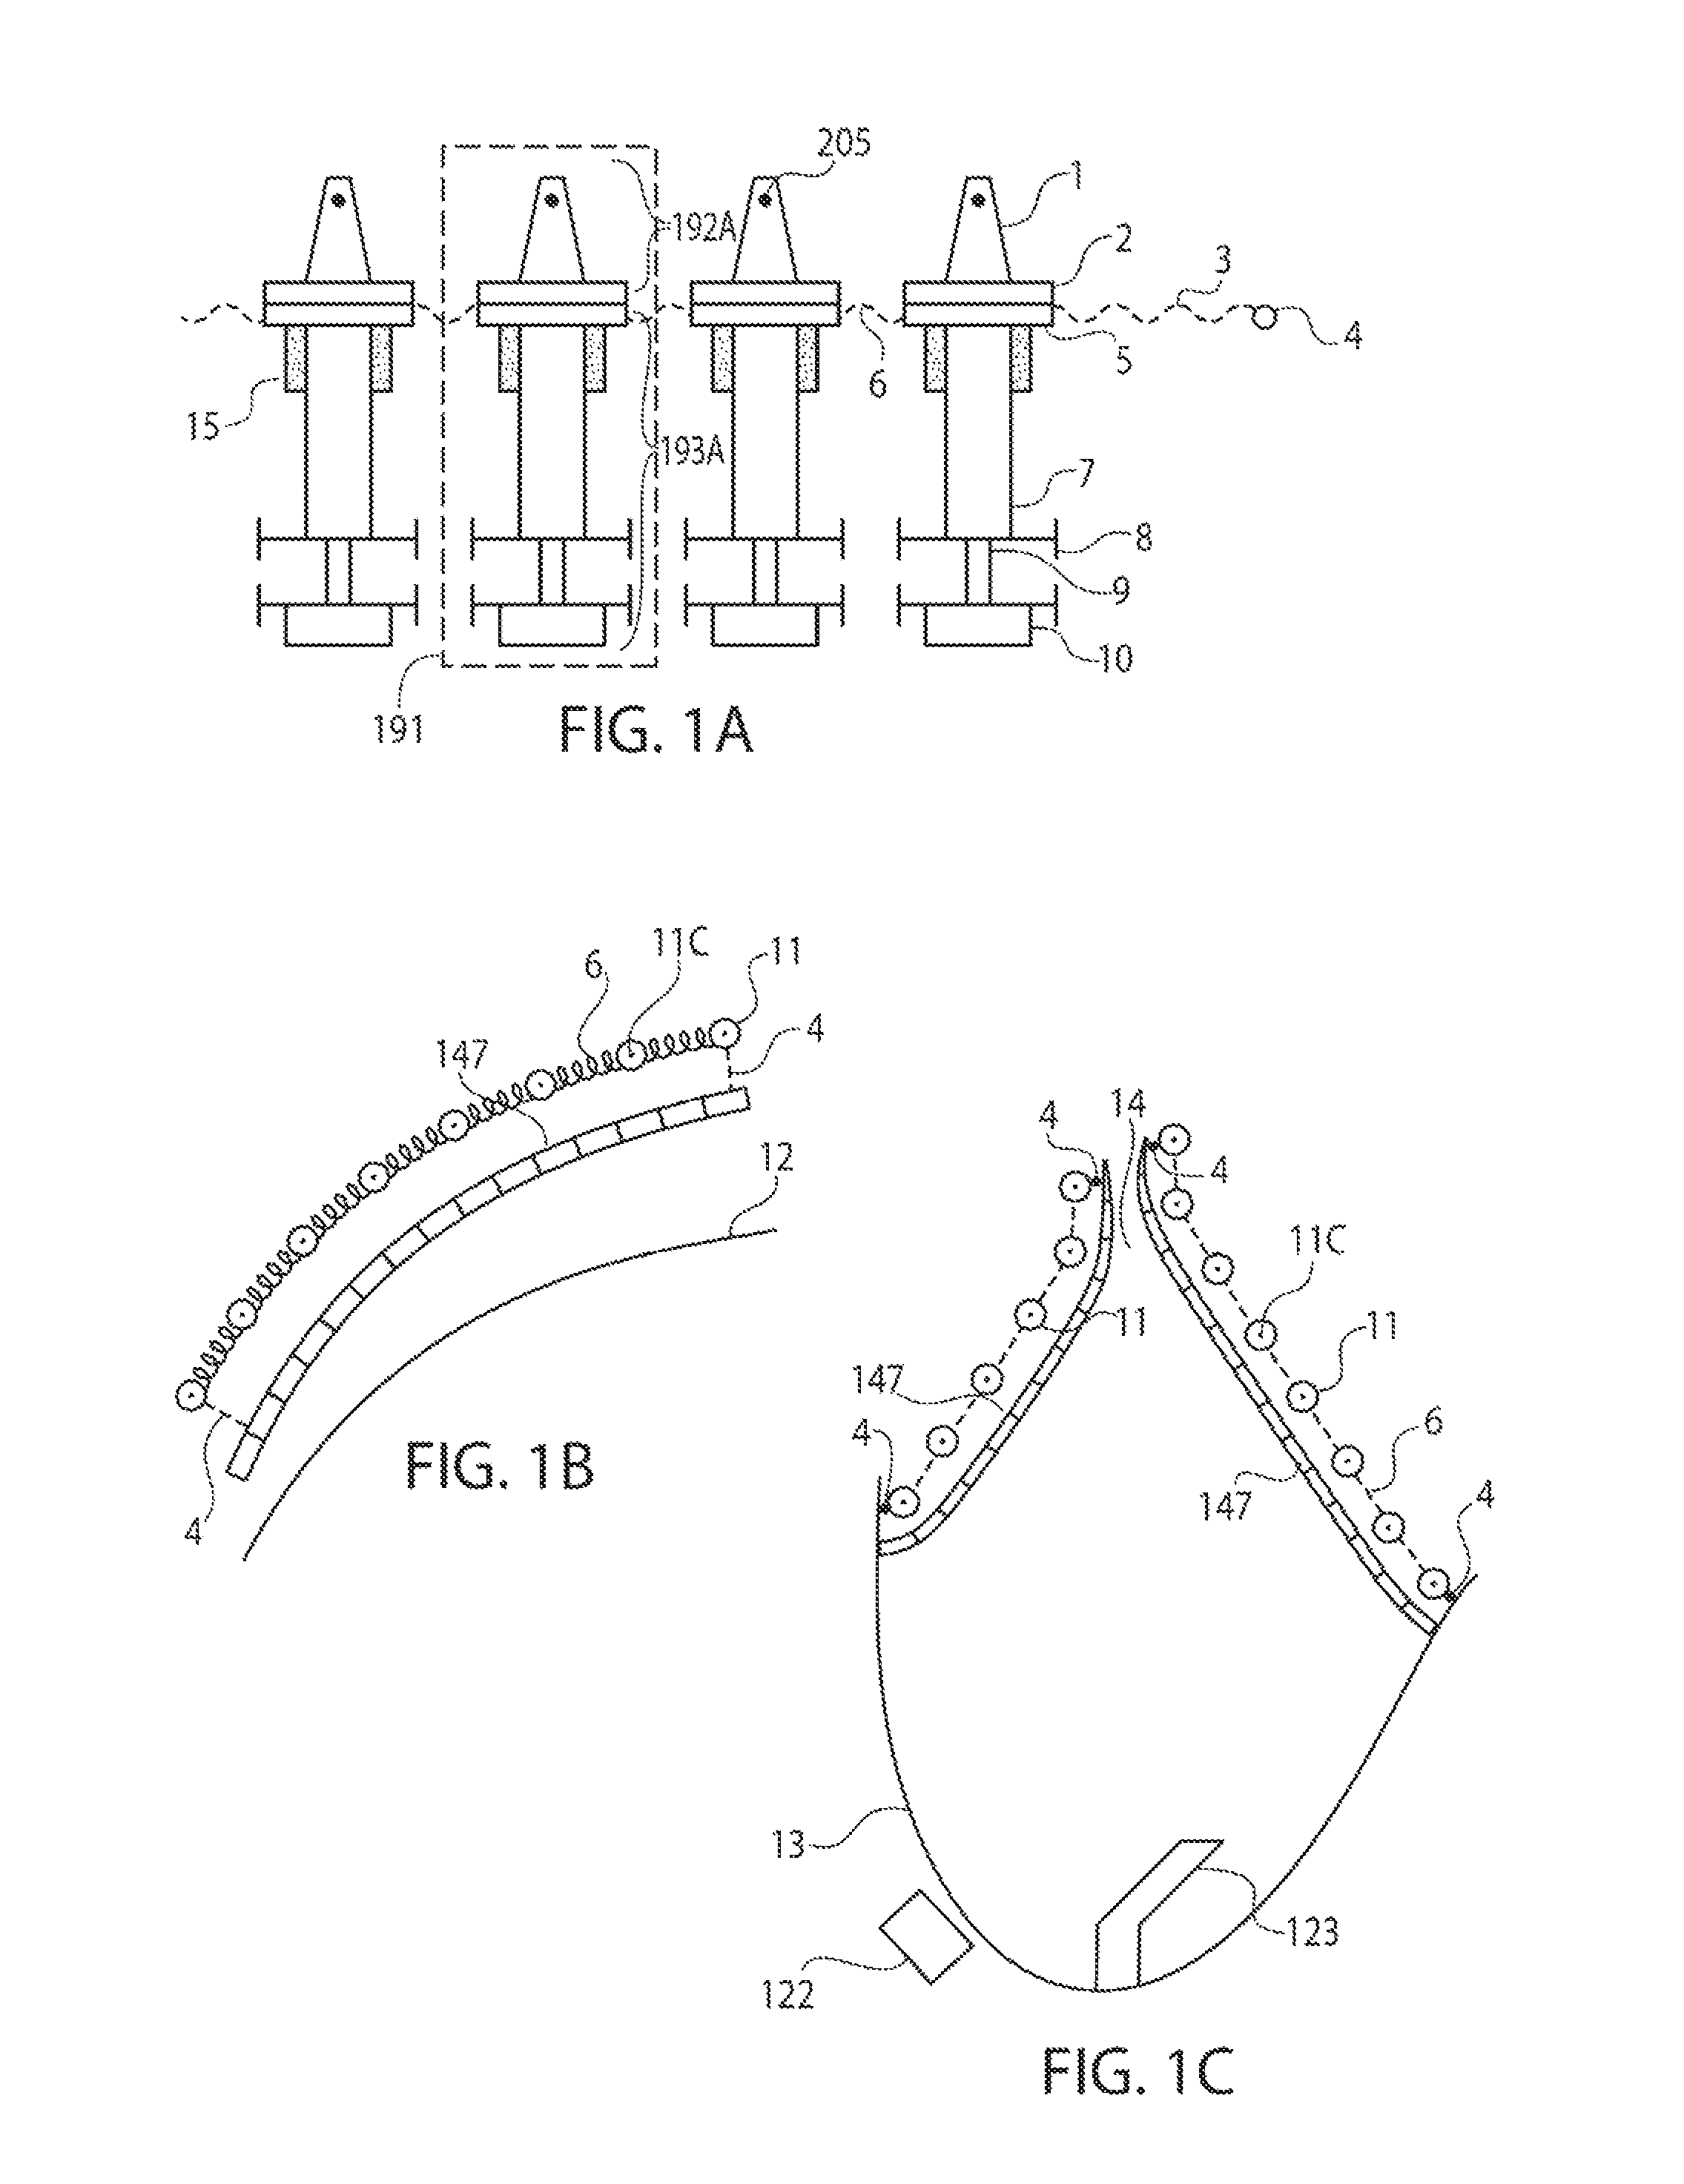 Linear faraday induction generator for the generation of electrical power from ocean wave kinetic energy and arrangements thereof